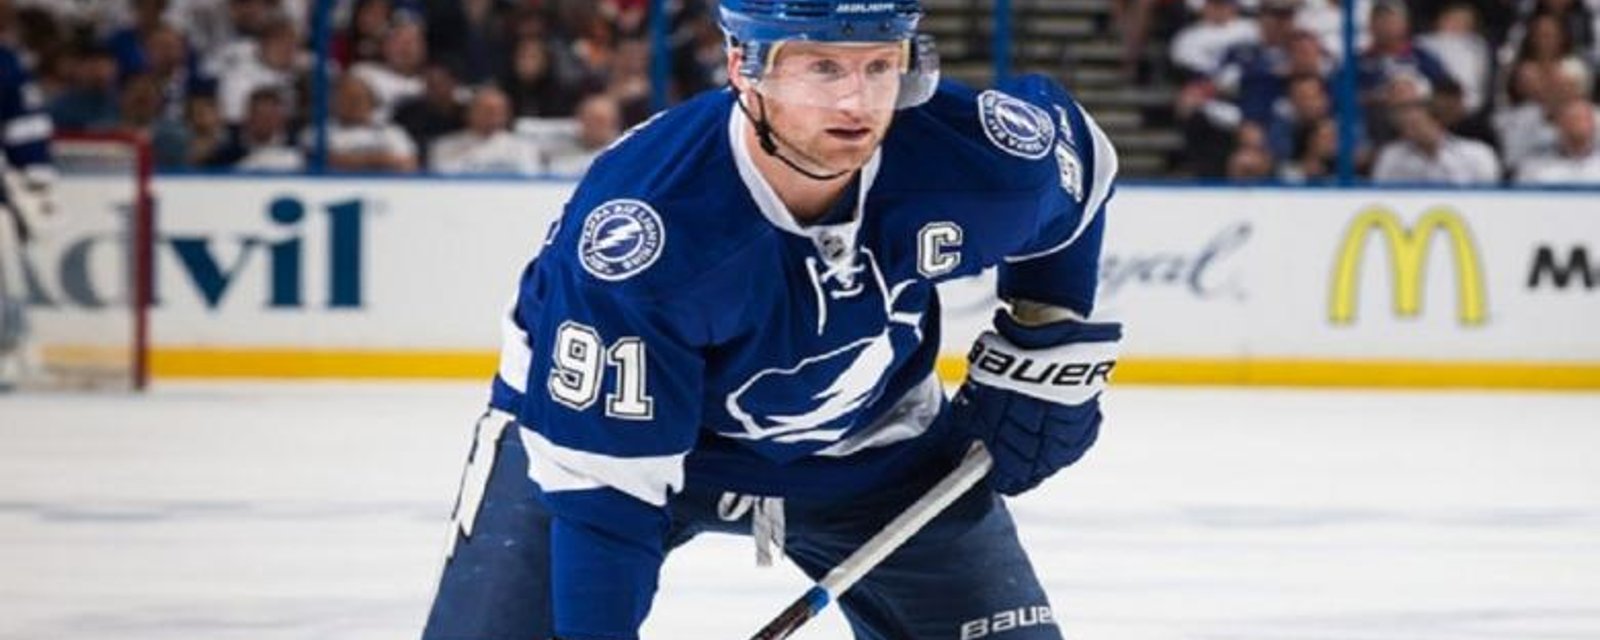 Tampa Bay Lightning reportedly made offer to Stamkos